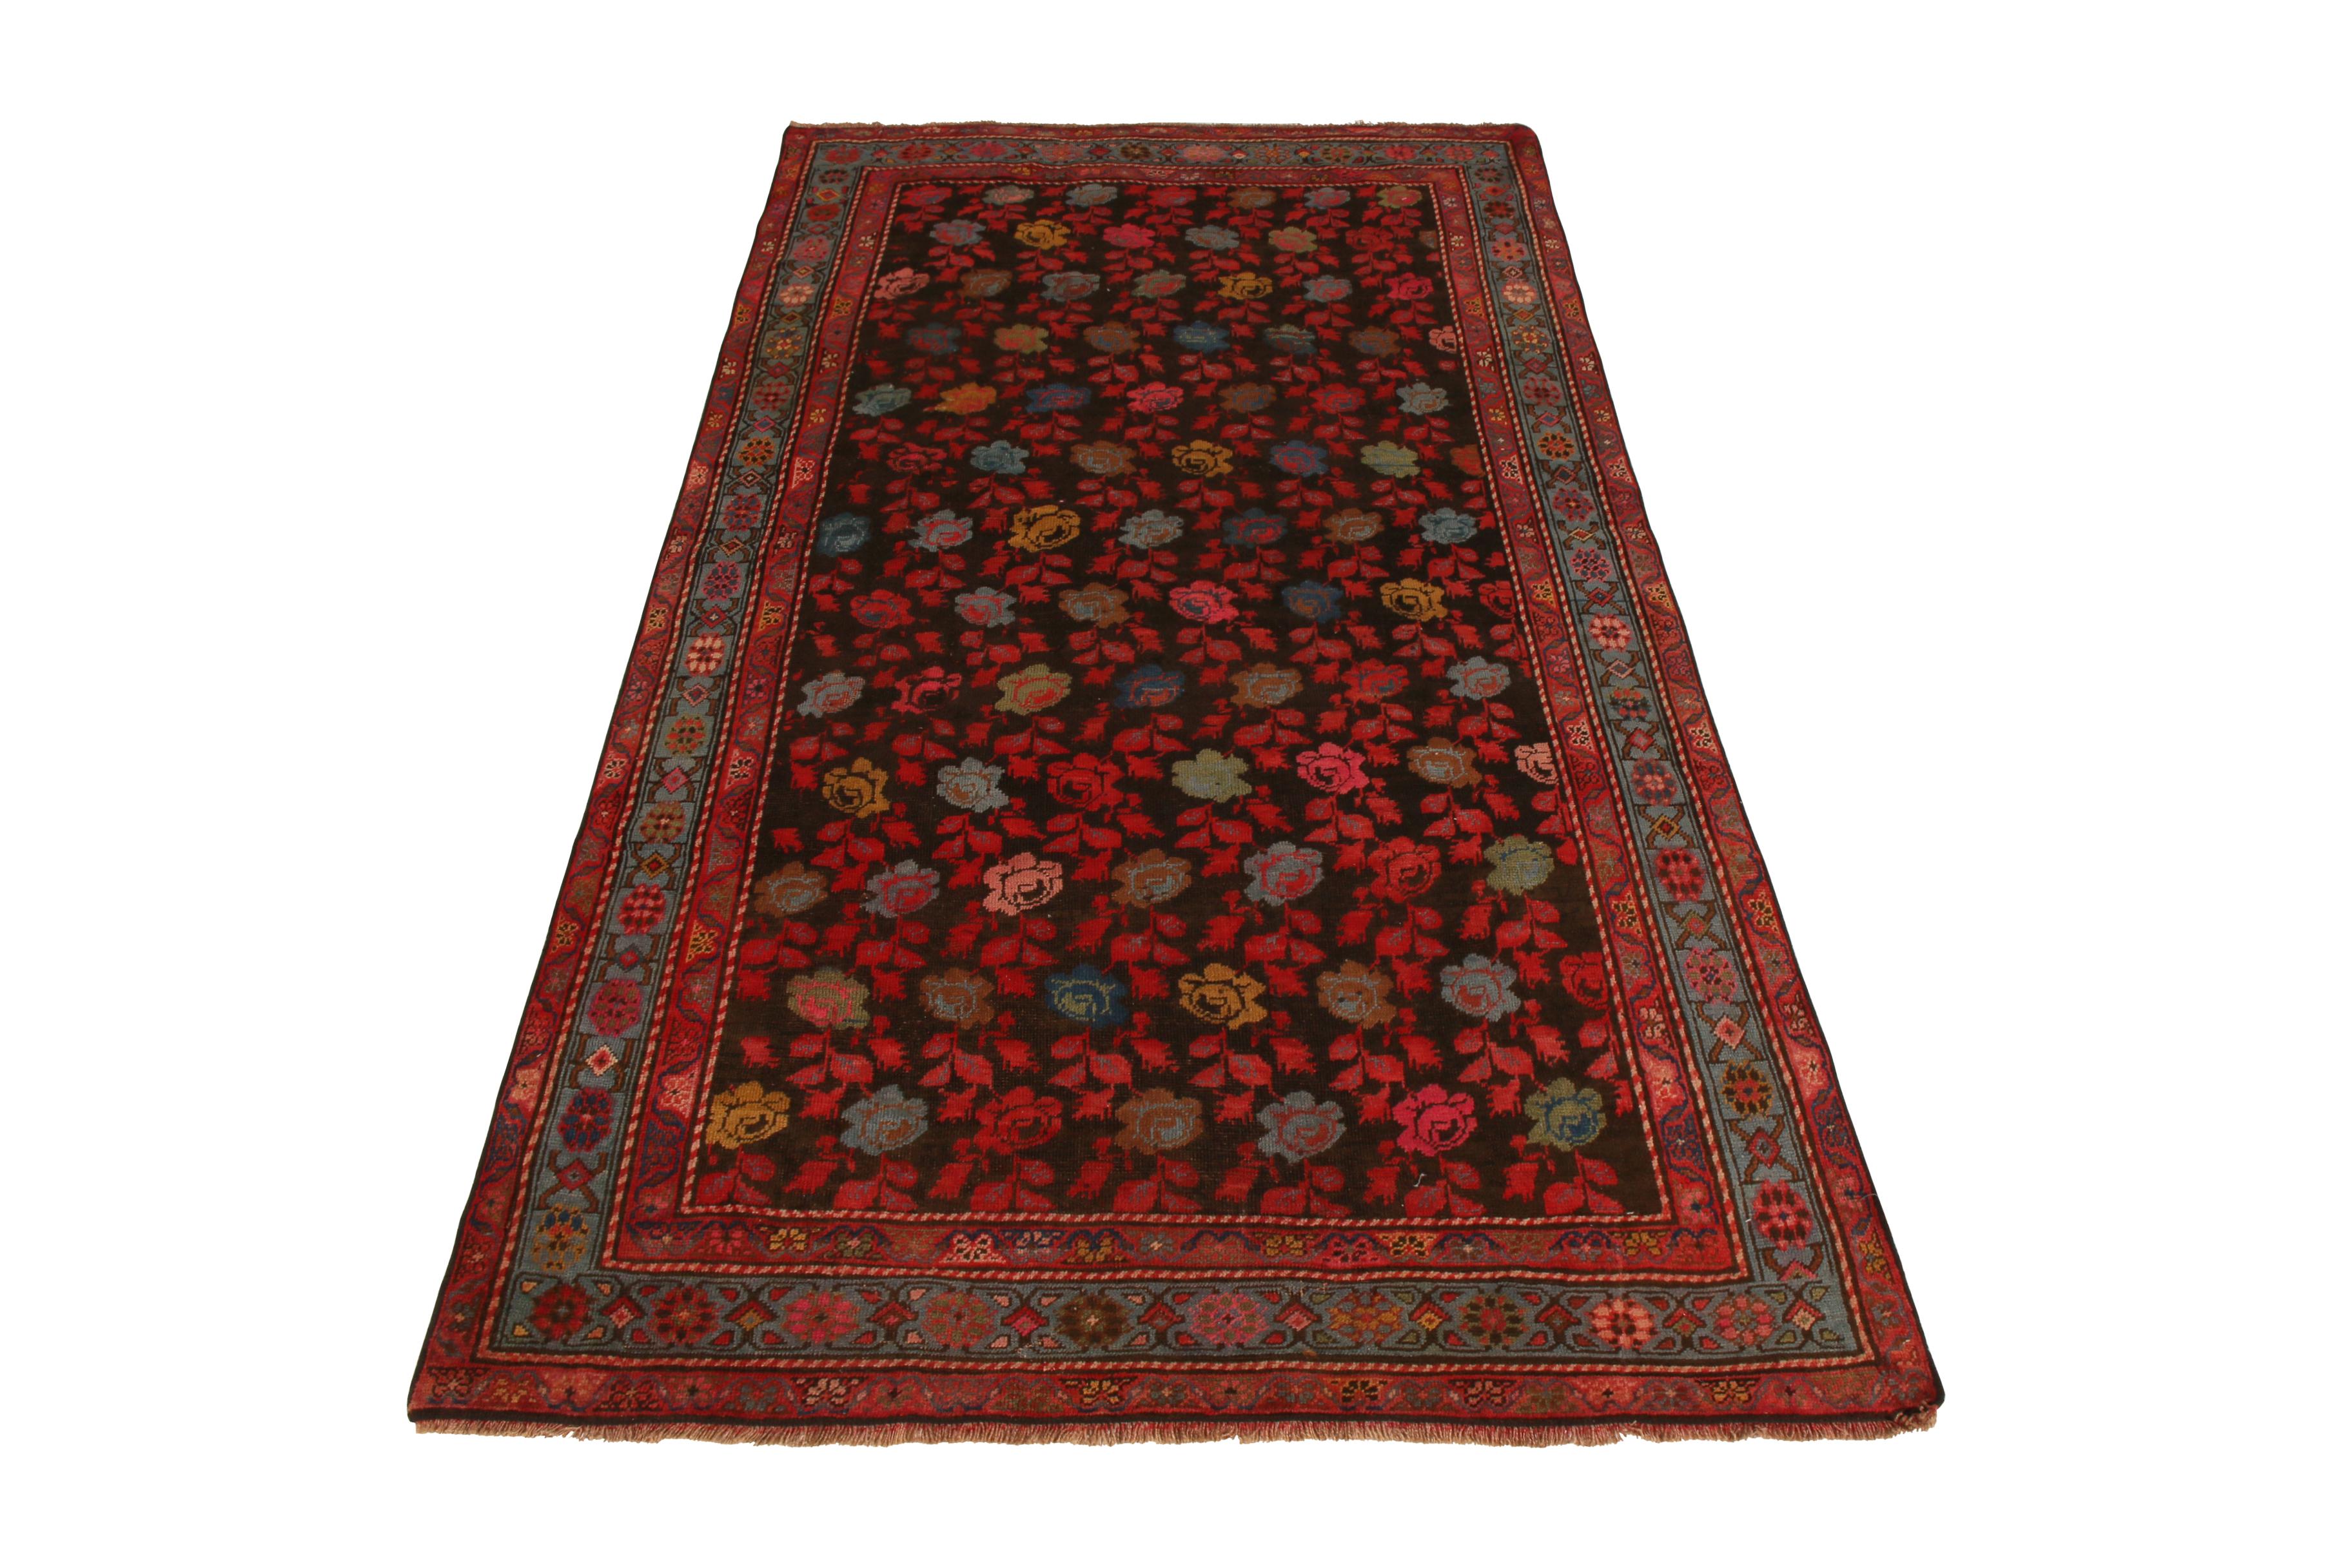 Originating from Russia circa 1890-1900, this antique piece connotes a Karabagh rug with a colorful approach to florals in deep, saturated hues arranged geometrically for clean arrangement. A favorite of our principal Josh Nazmiyal, the weave and